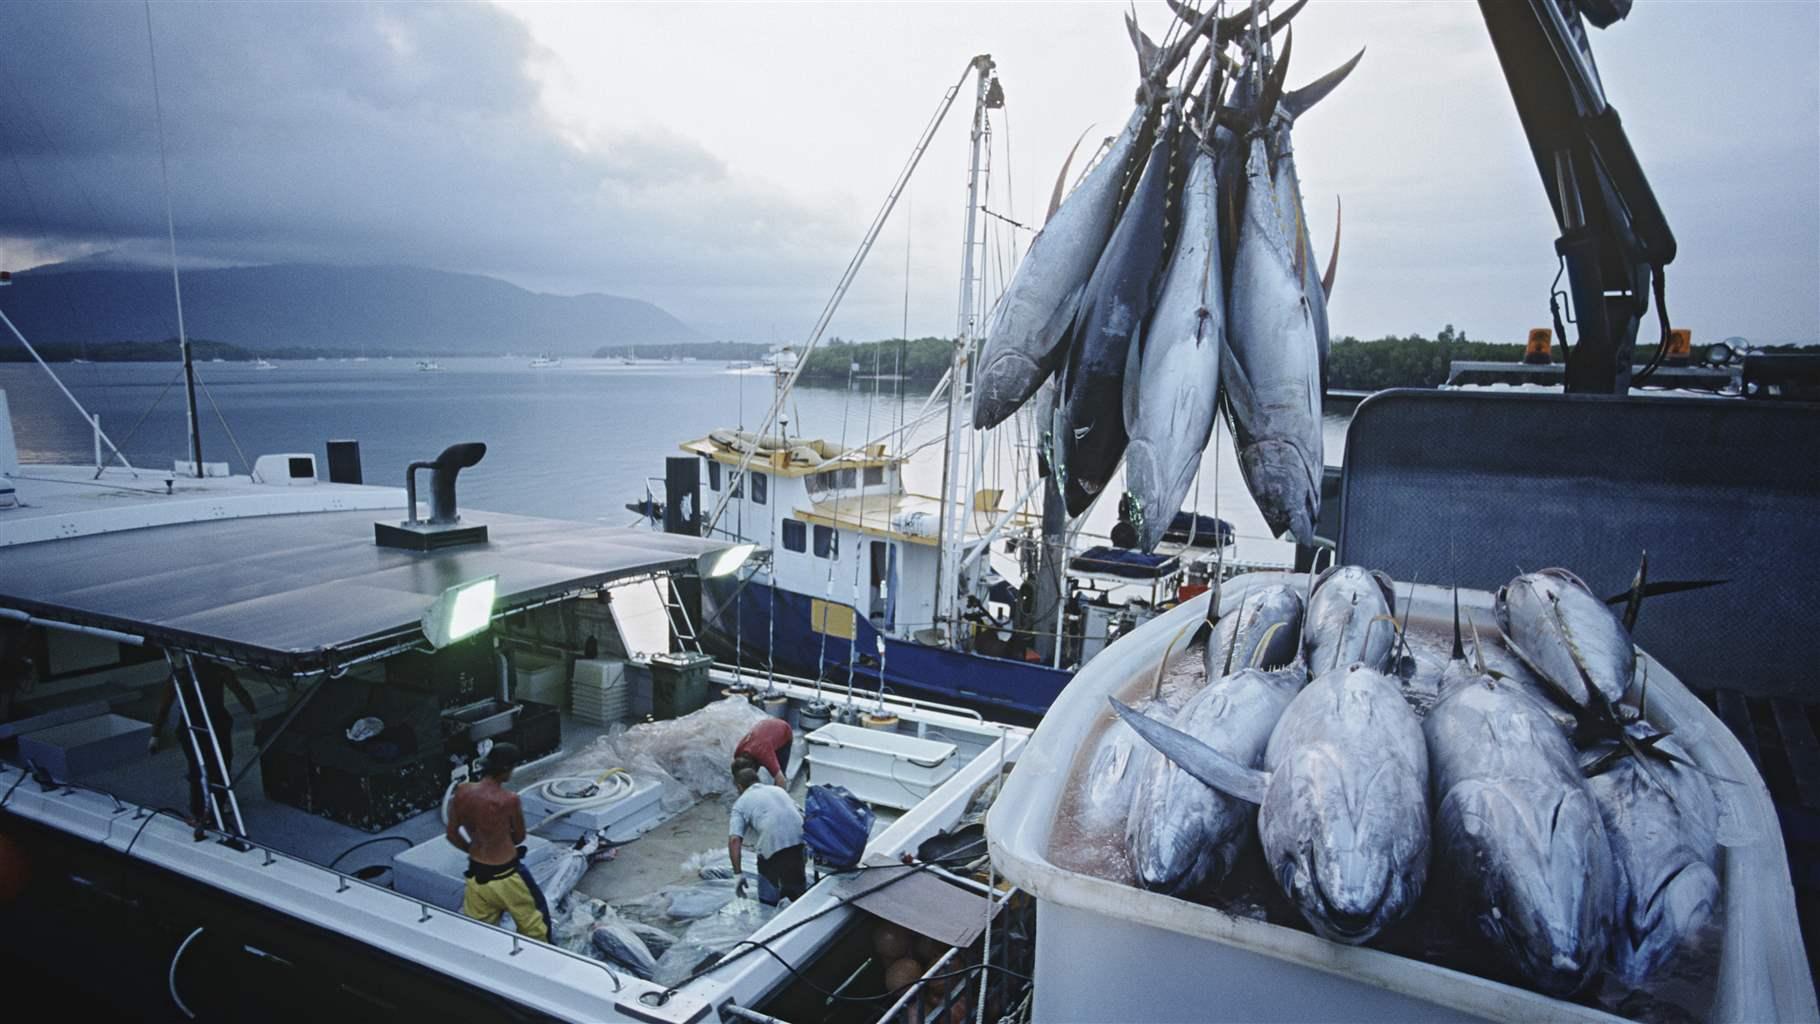 Fish hang from a crane beside a bin holding other fish, as they are unloaded from a vessel docked in calm waters on a cloudy day. Three workers are visible on the deck.